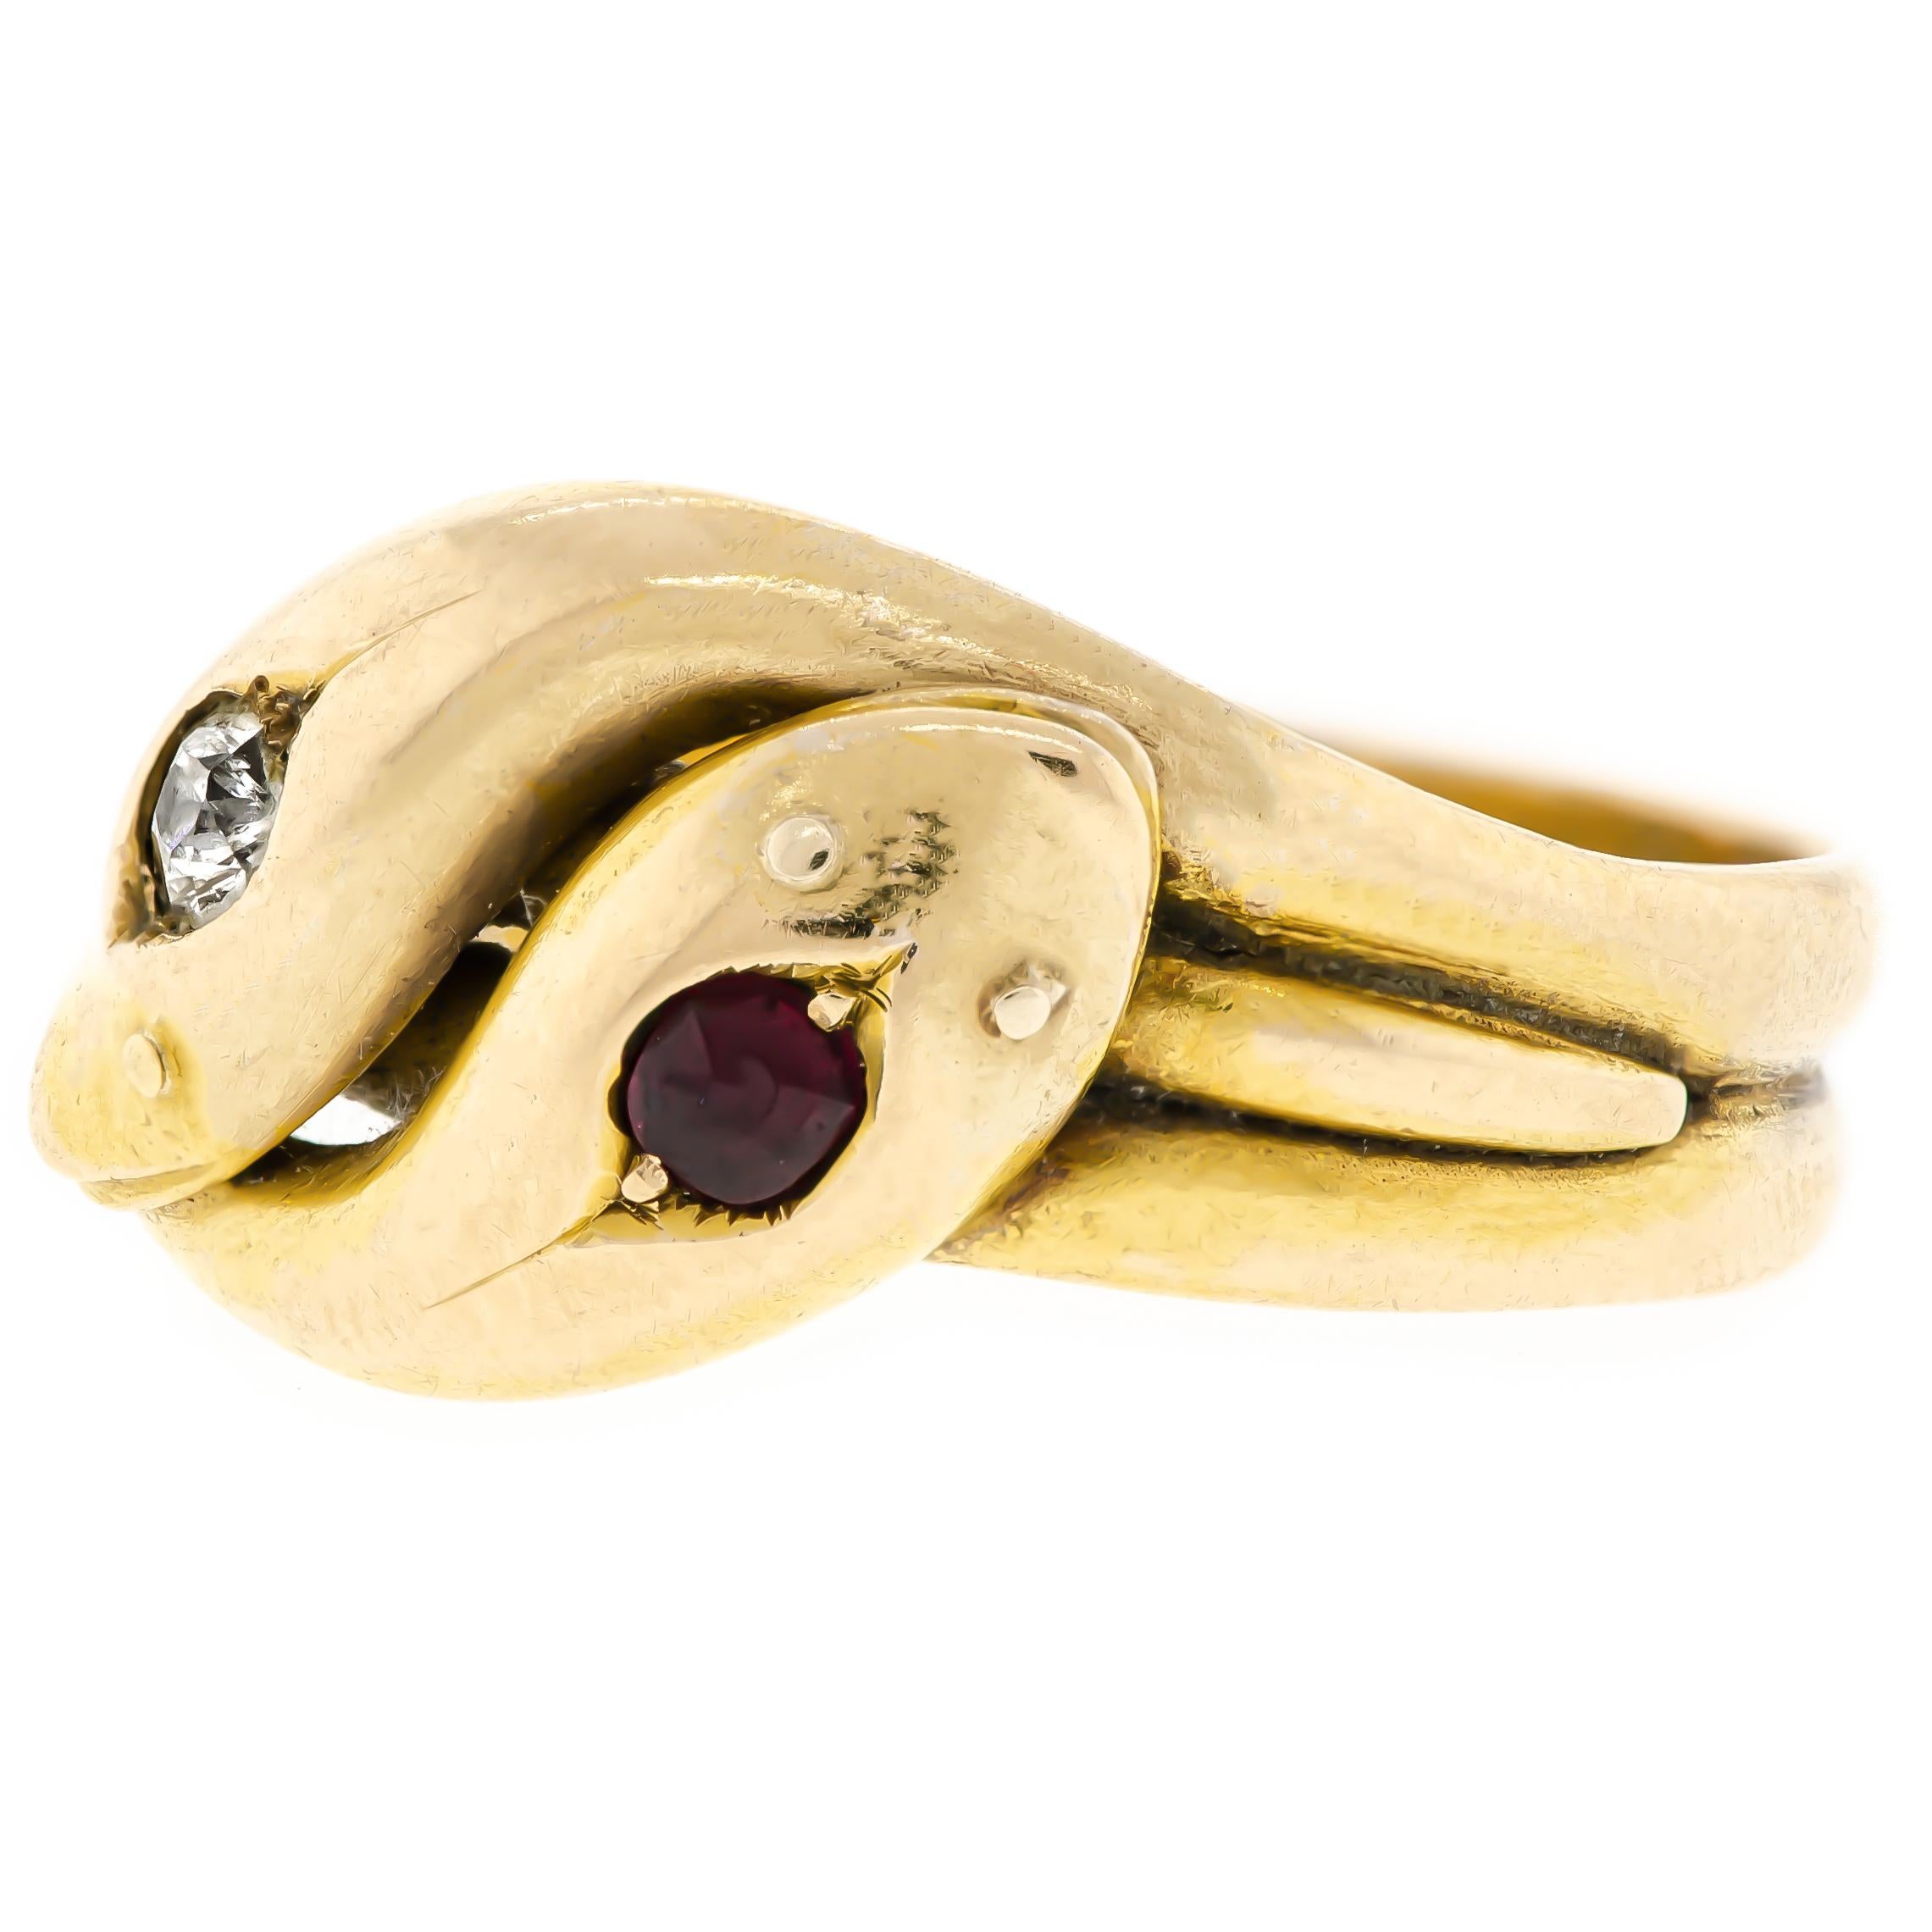 This fabulous diamond and ruby 15-carat double snake ring is a lovely Victorian find. During the Victorian era, two entwined serpents suggested love and were often given as a sign of affection. It was not uncommon to see this style of ring worn by